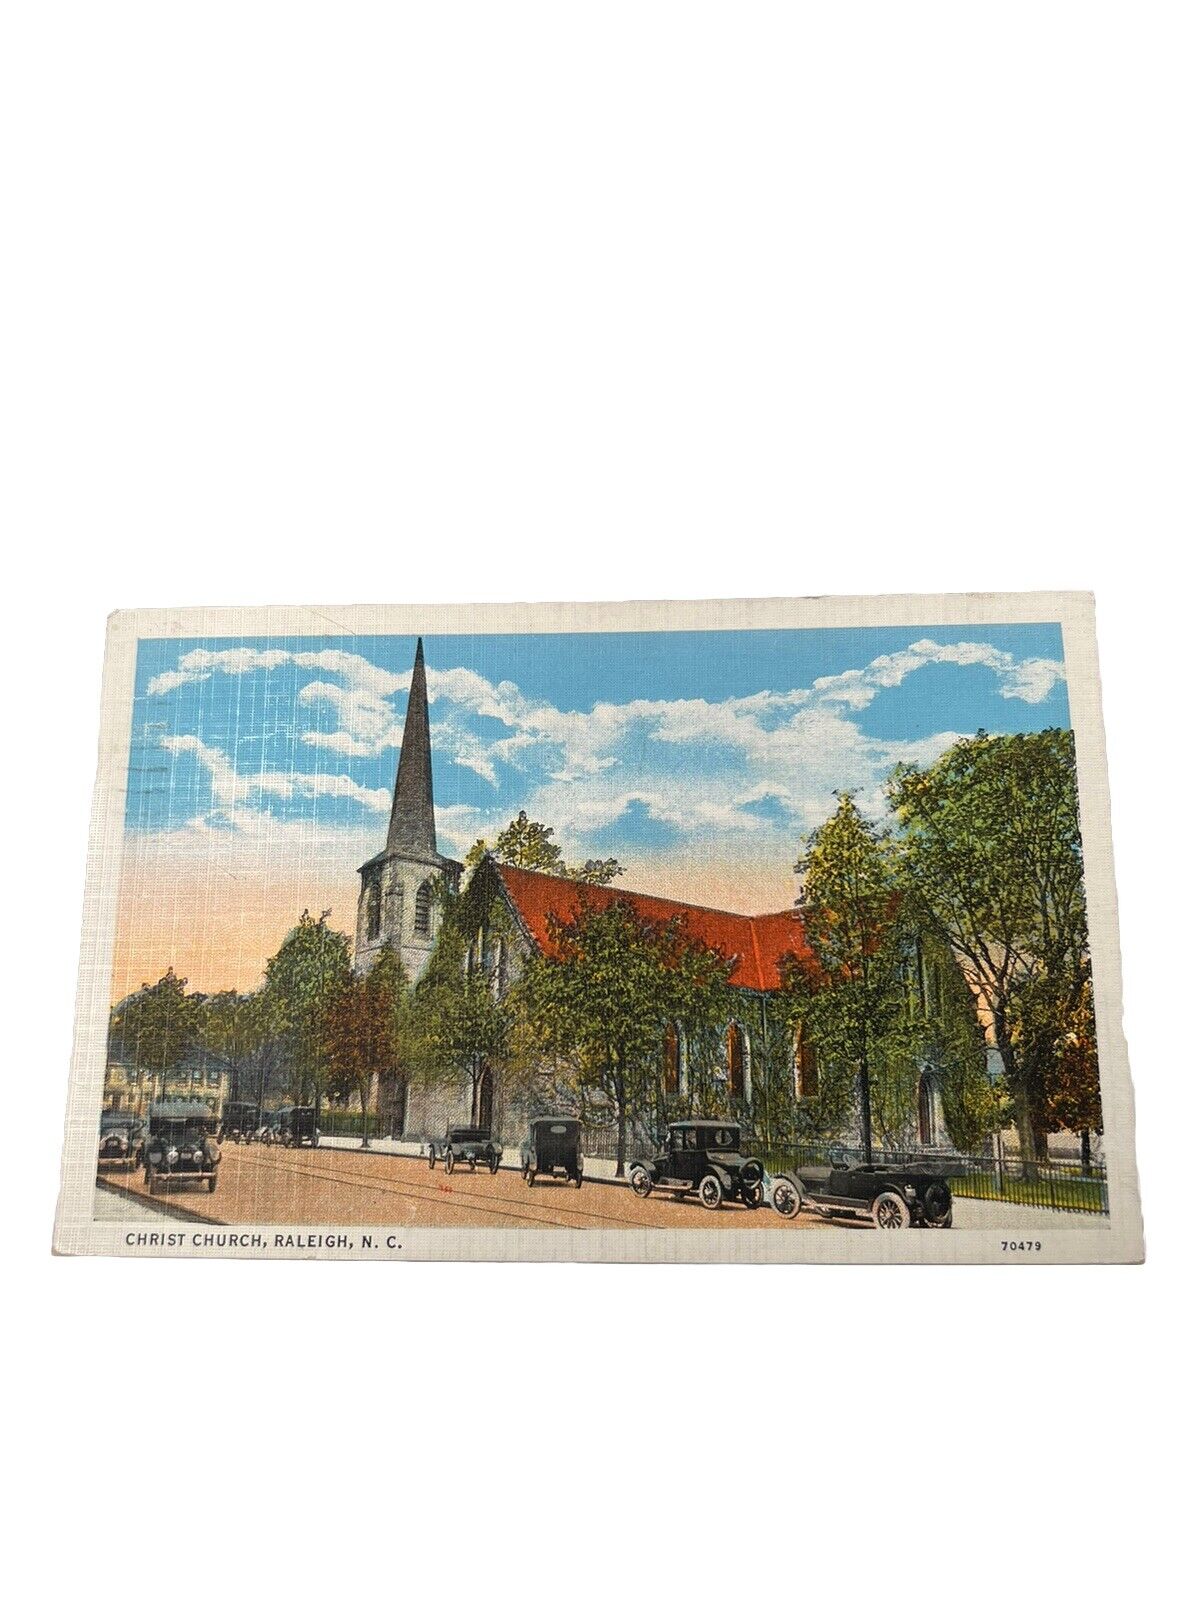 Christ Church, Raleigh, North Carolina Vintage Linen Postcard With Classic Cars.